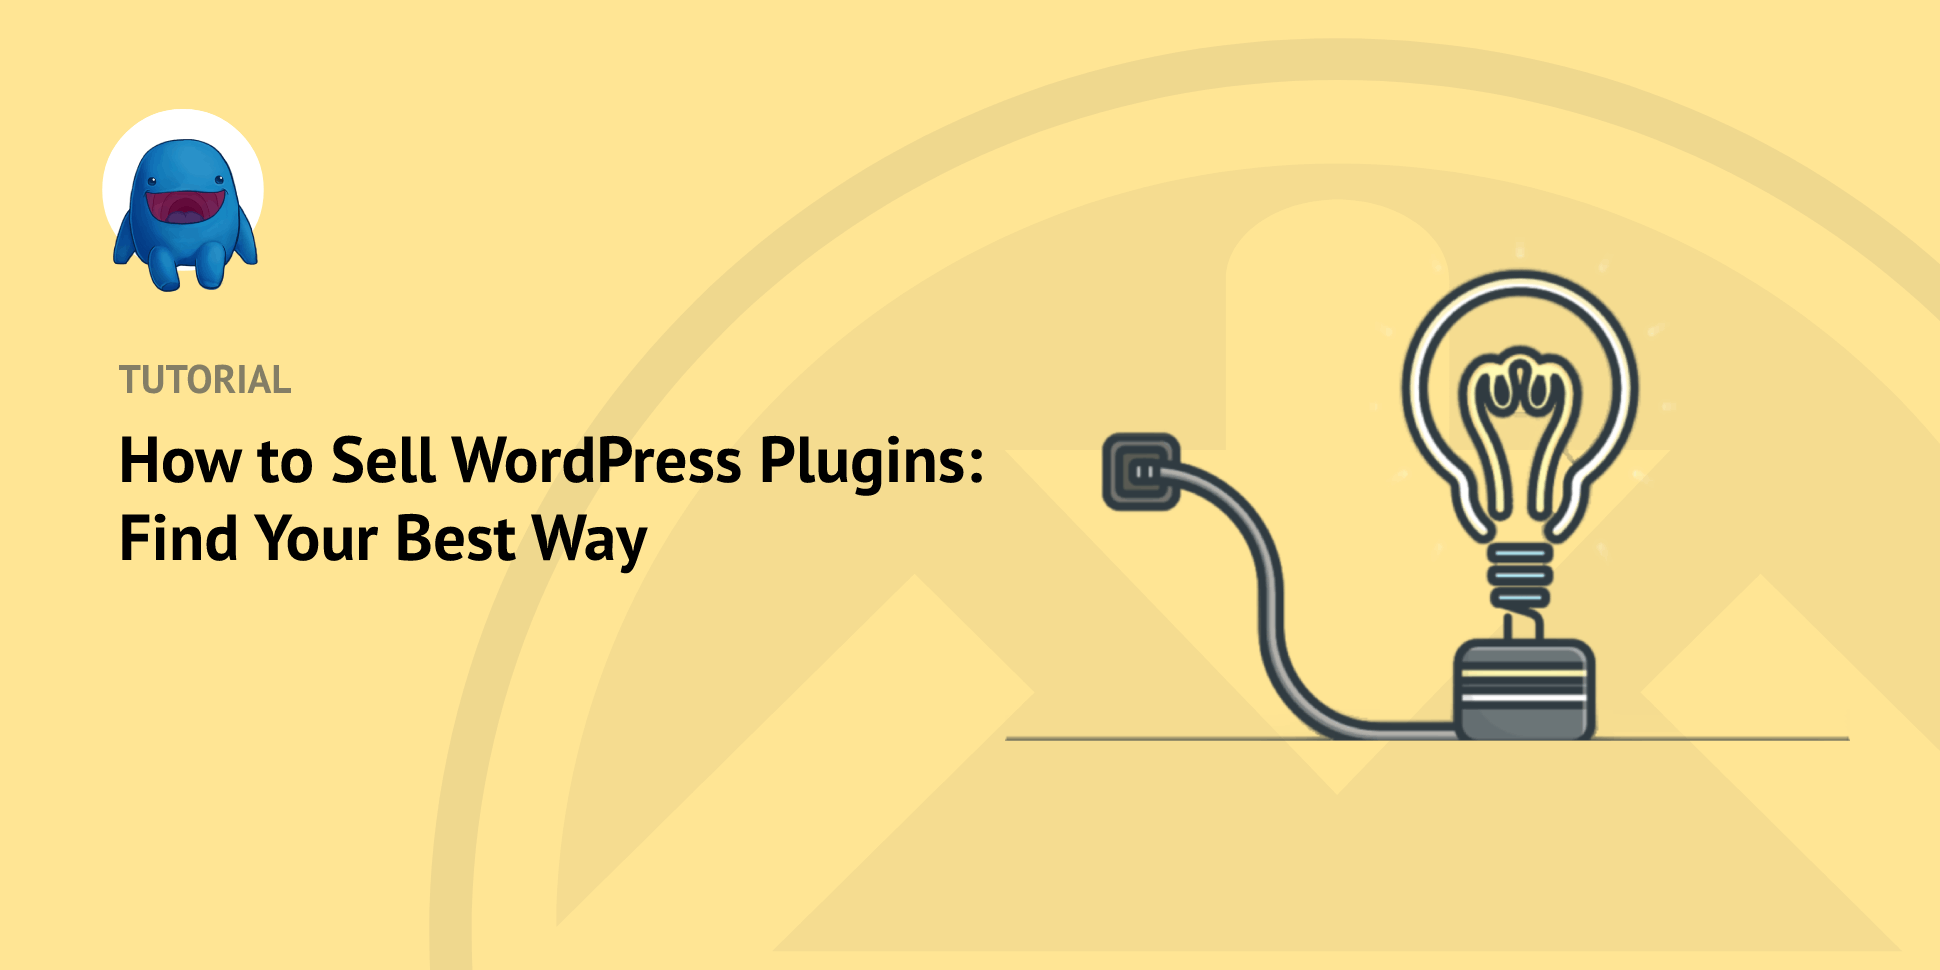 How to Sell WordPress Plugins: Find Your Best Way